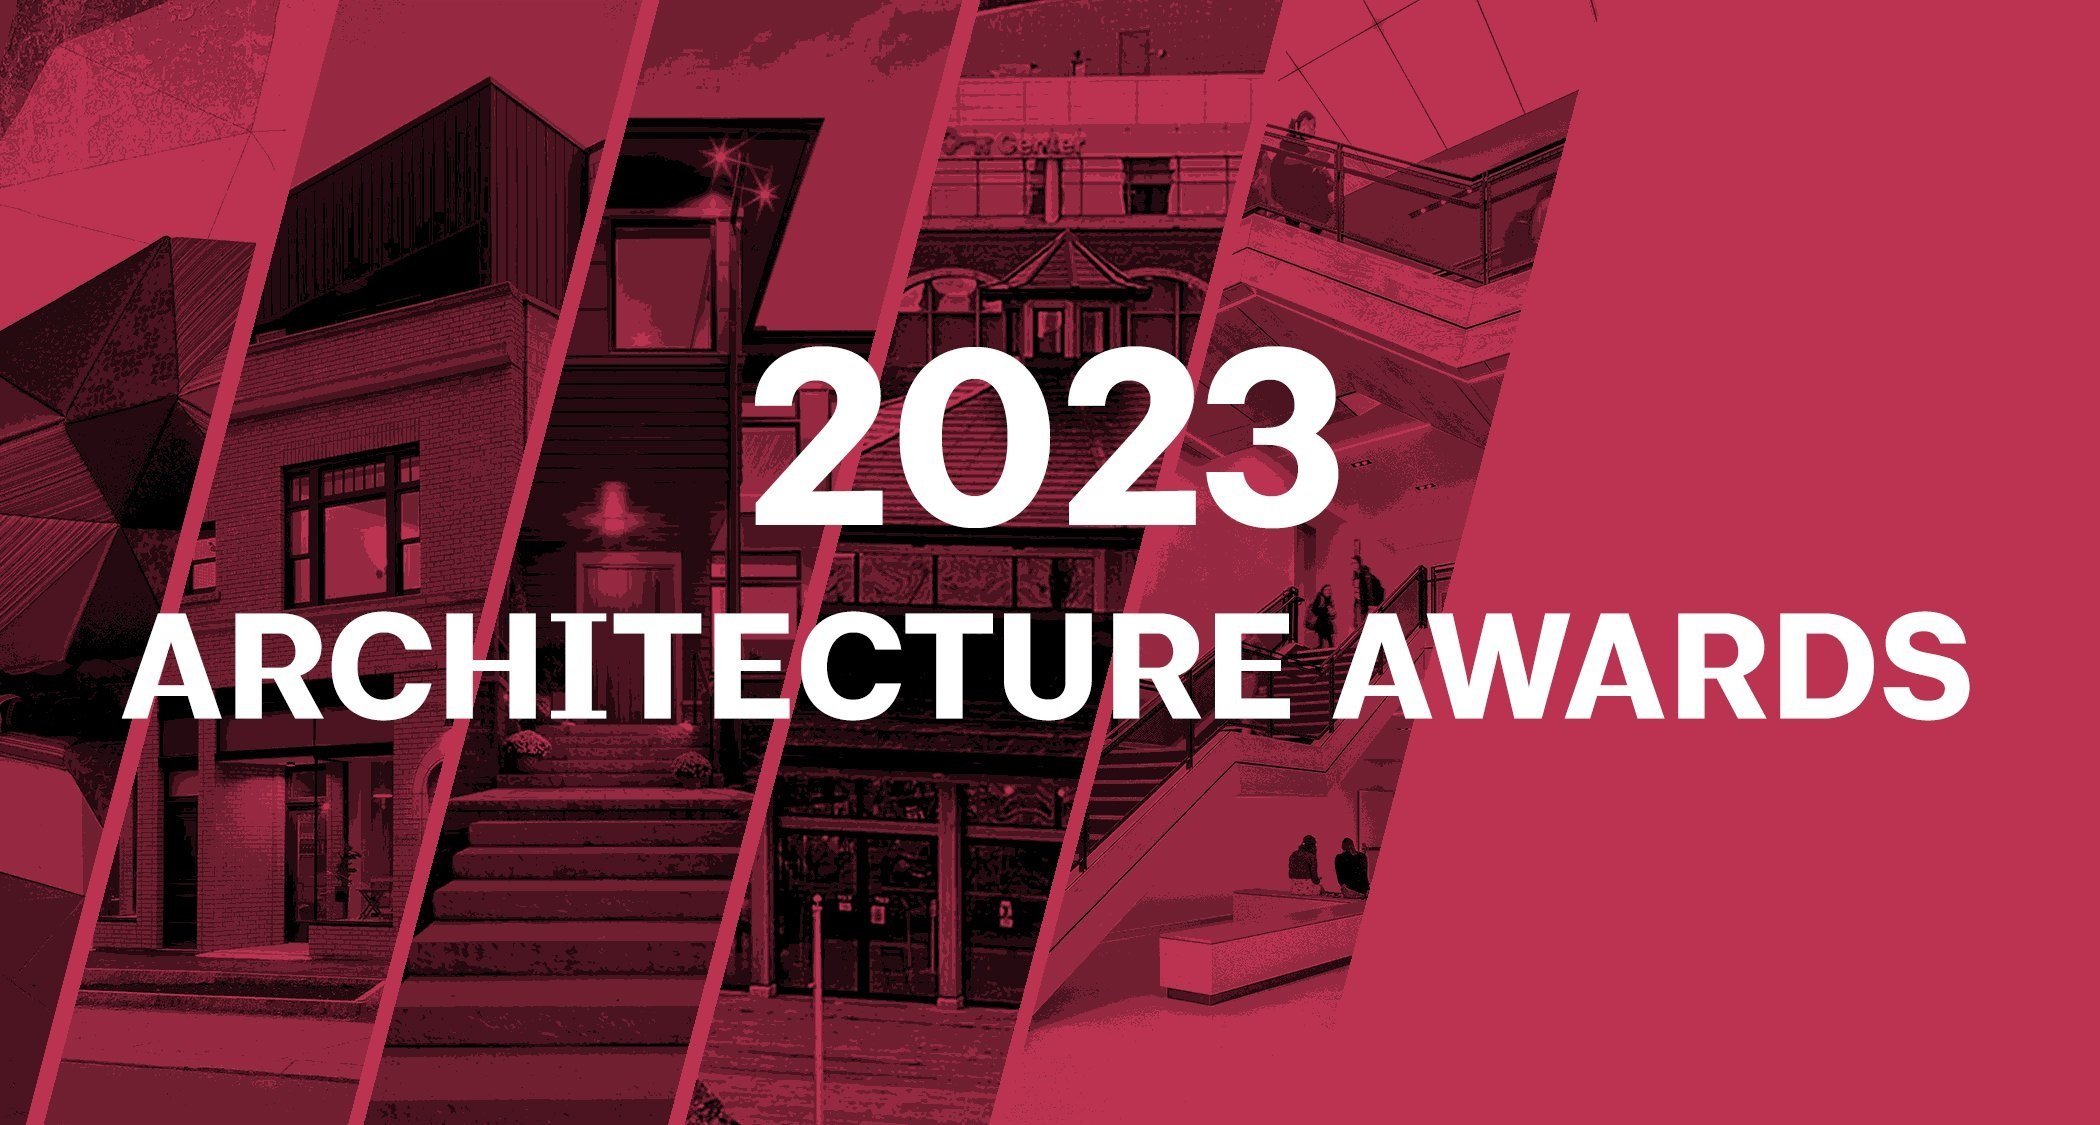 2023 ARCHITECTURE AWARDS ARE HERE